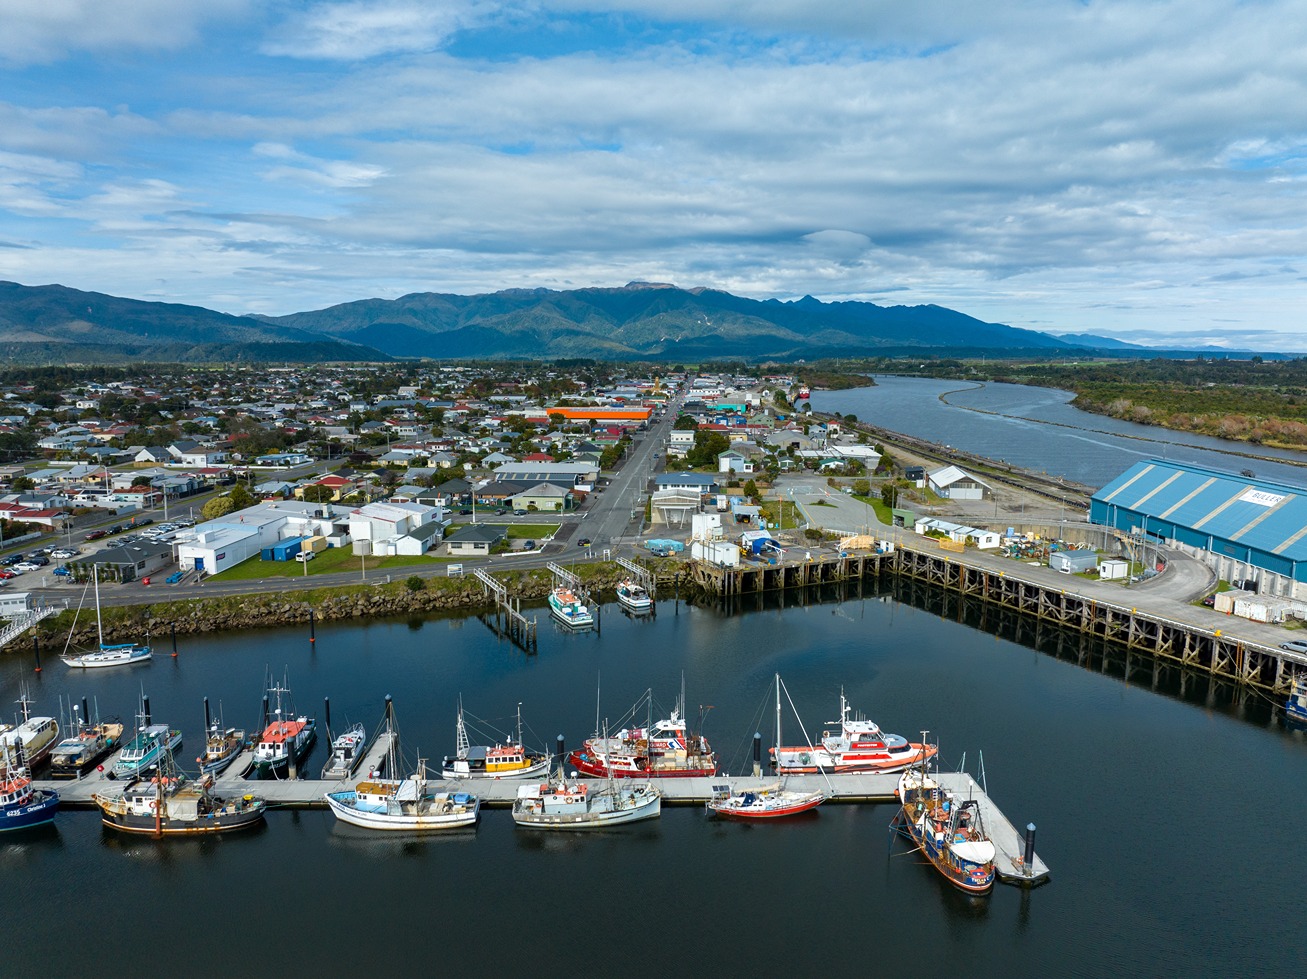 Wharf from above with fishing boats